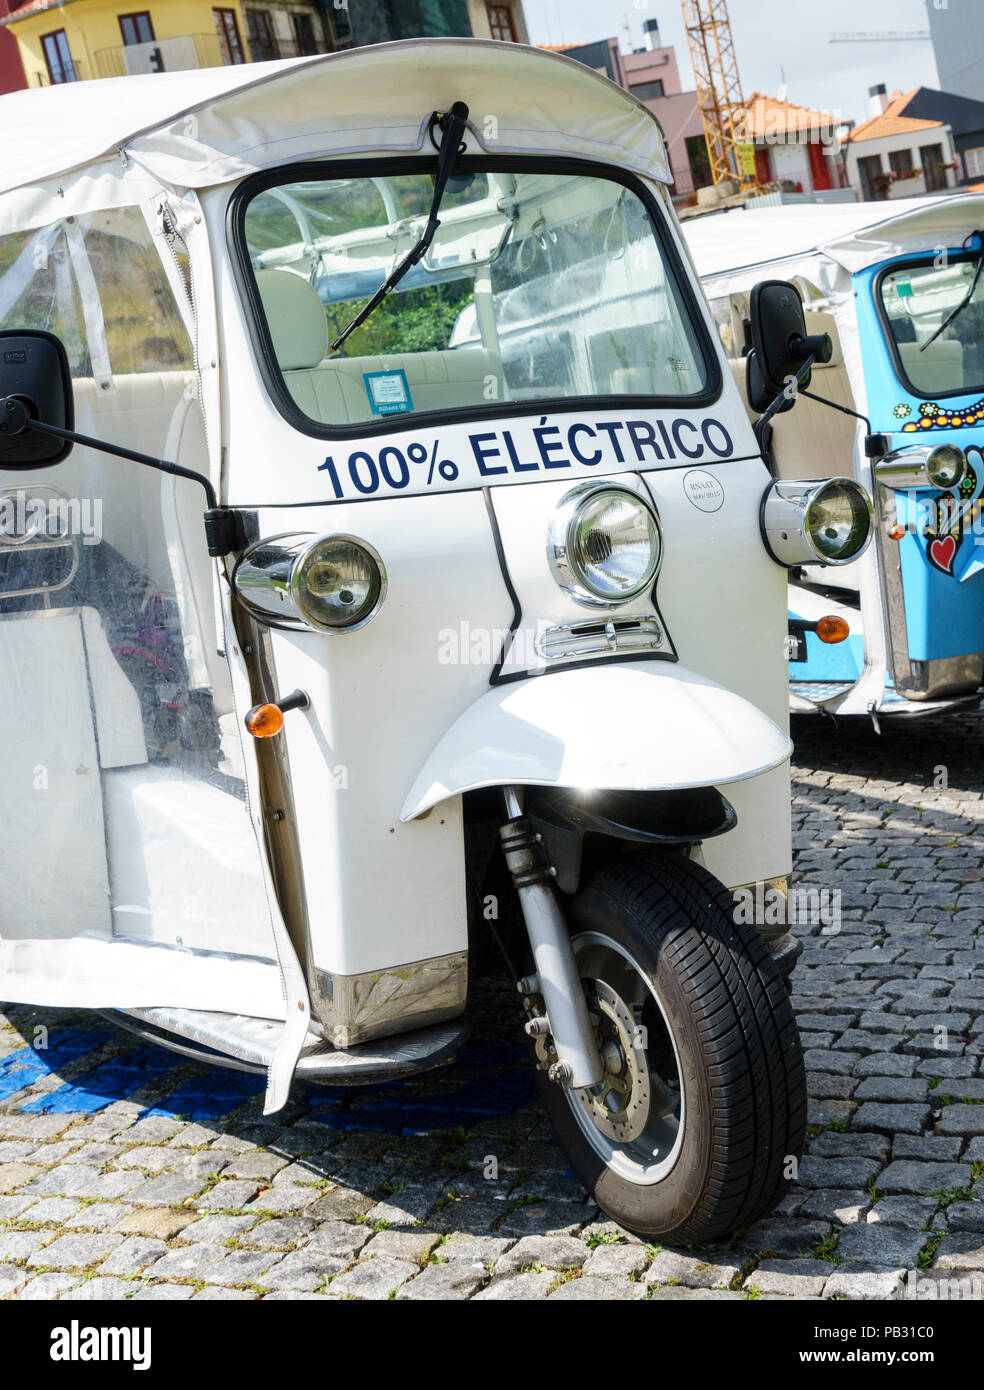 Closeup front view of a 100% electric tuktuk or three wheeled car in Porto Portugal Stock Photo